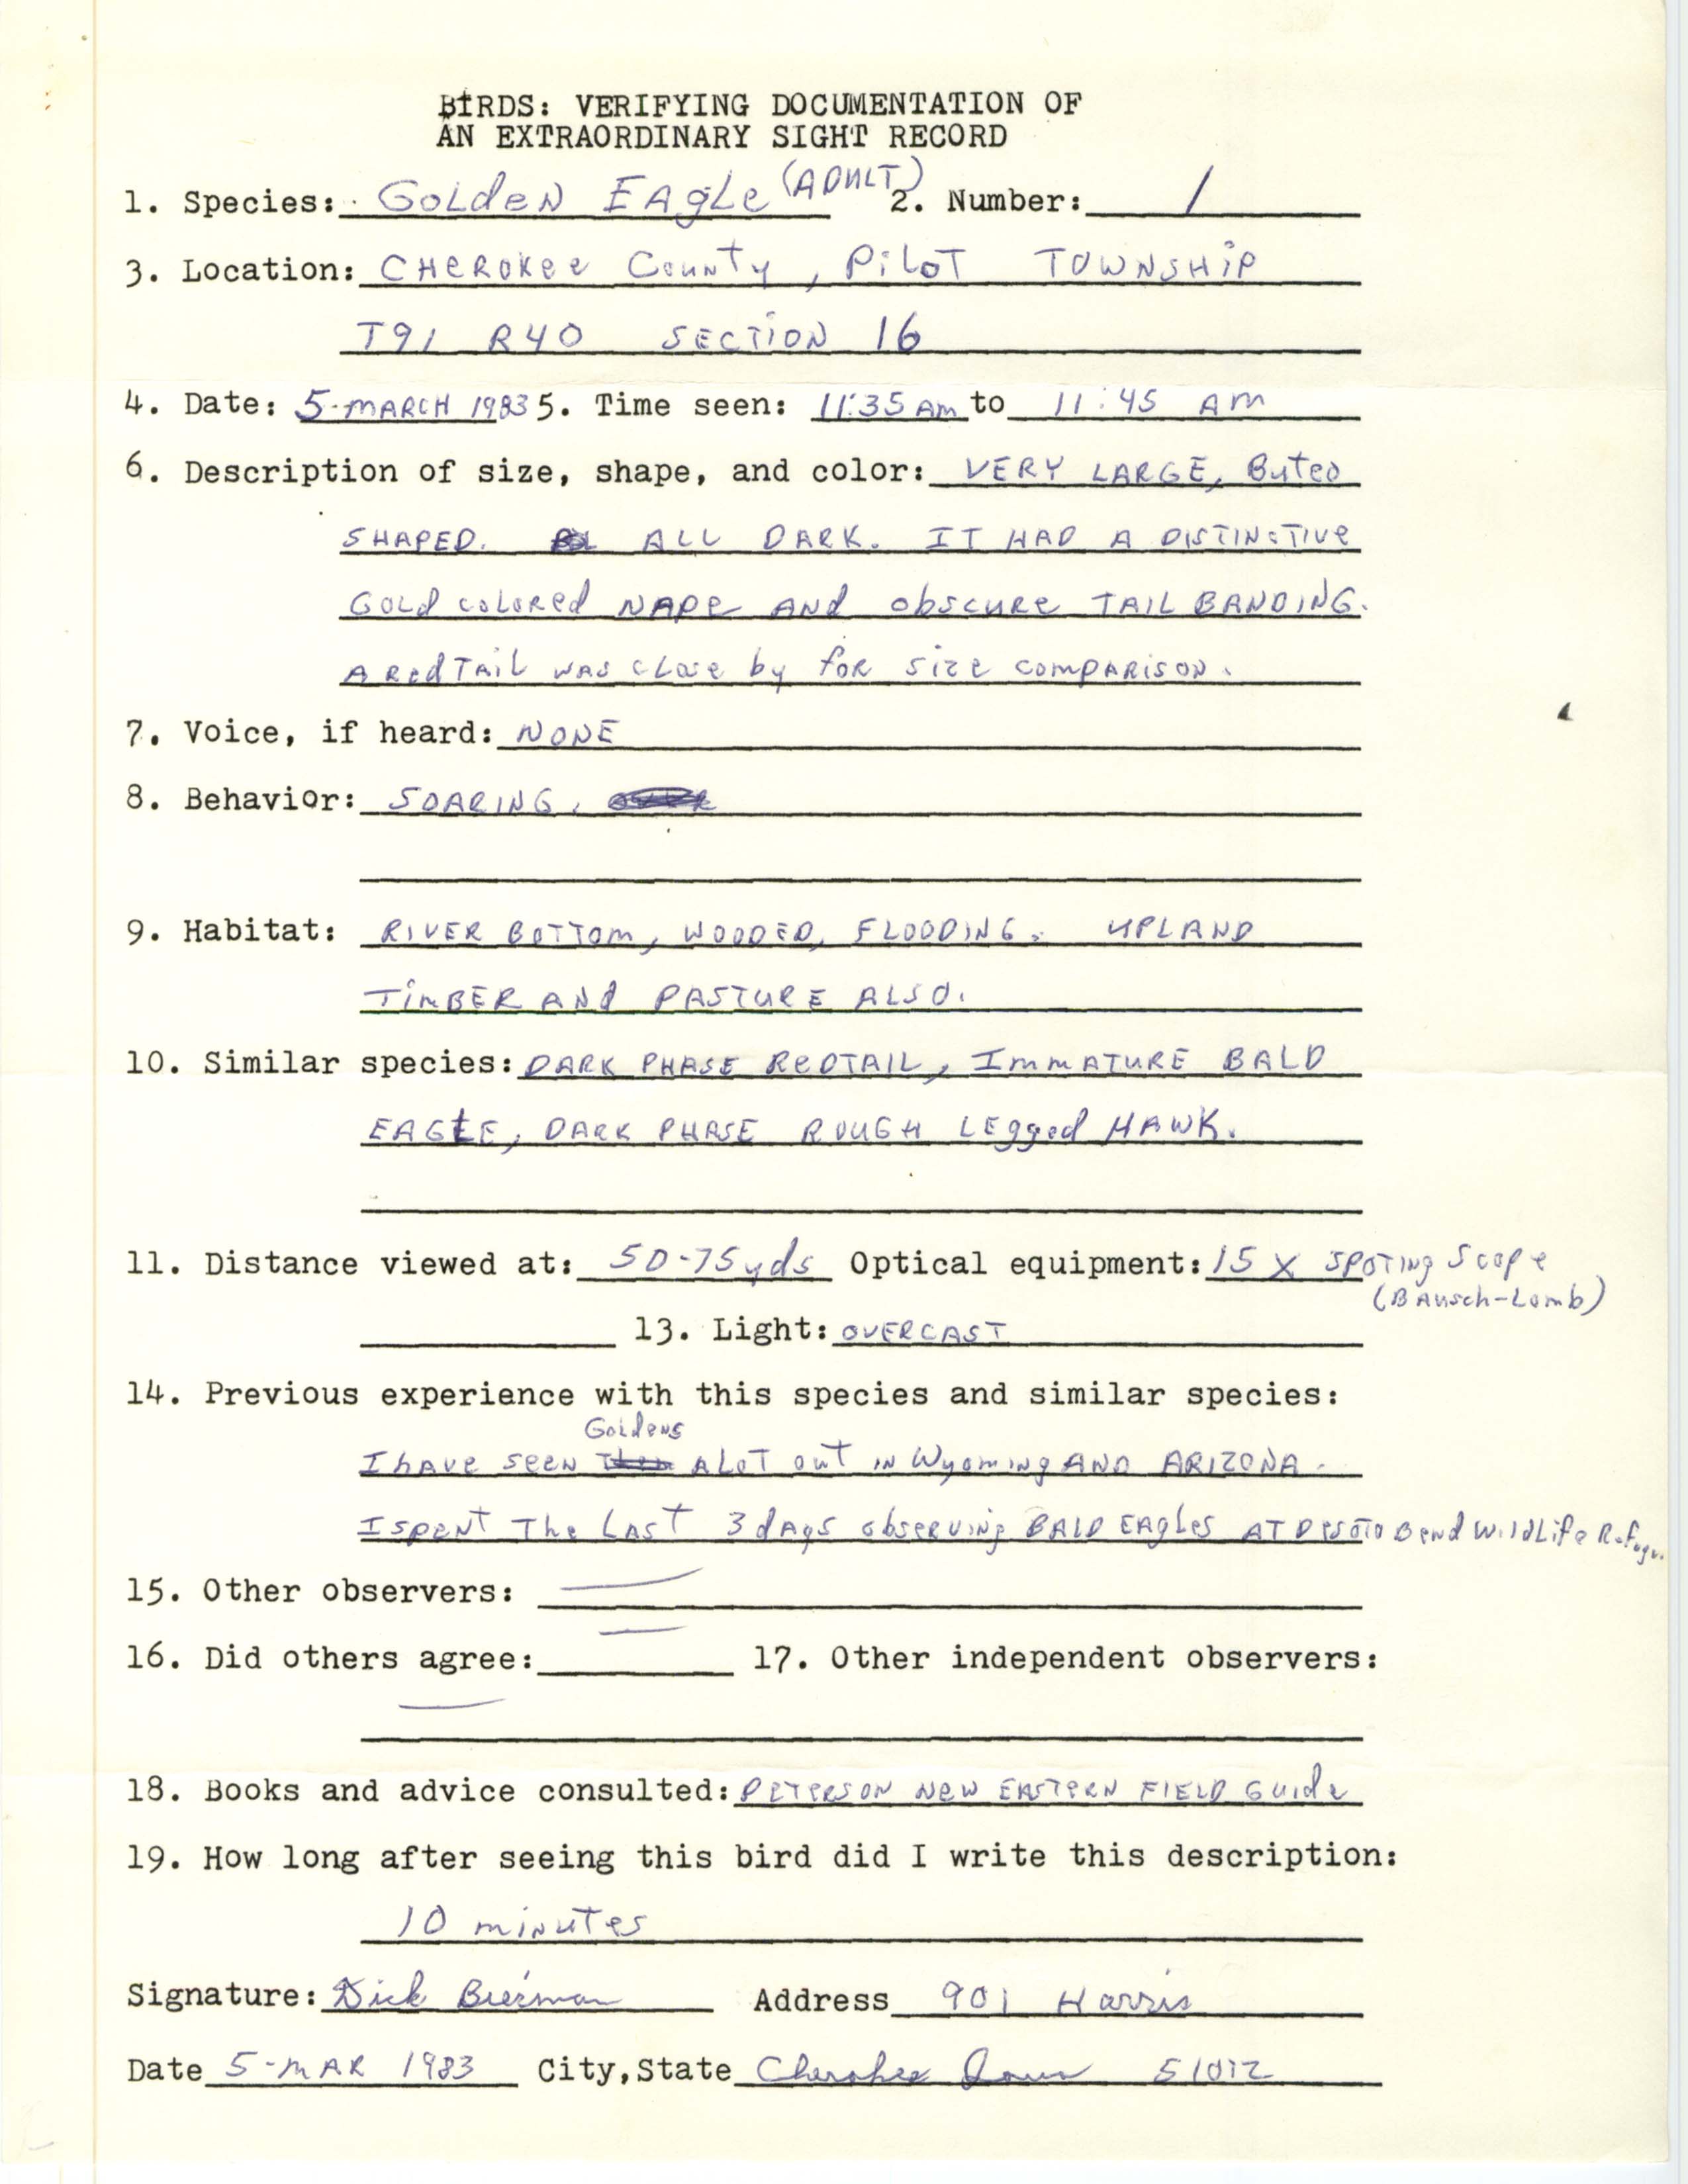 Rare bird documentation form for Golden Eagle at Pilot Township in Cherokee County, 1983